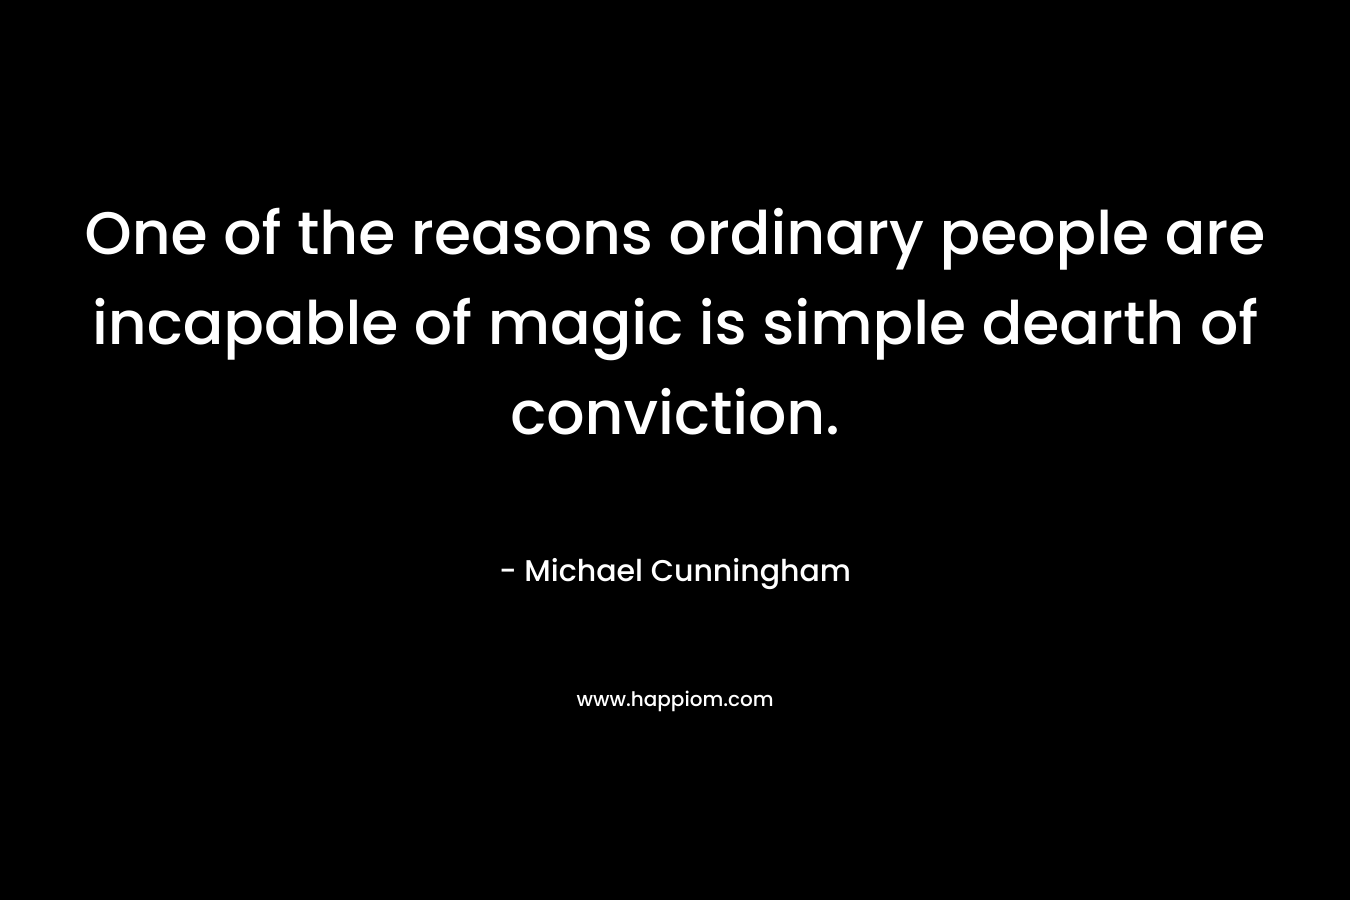 One of the reasons ordinary people are incapable of magic is simple dearth of conviction. – Michael Cunningham